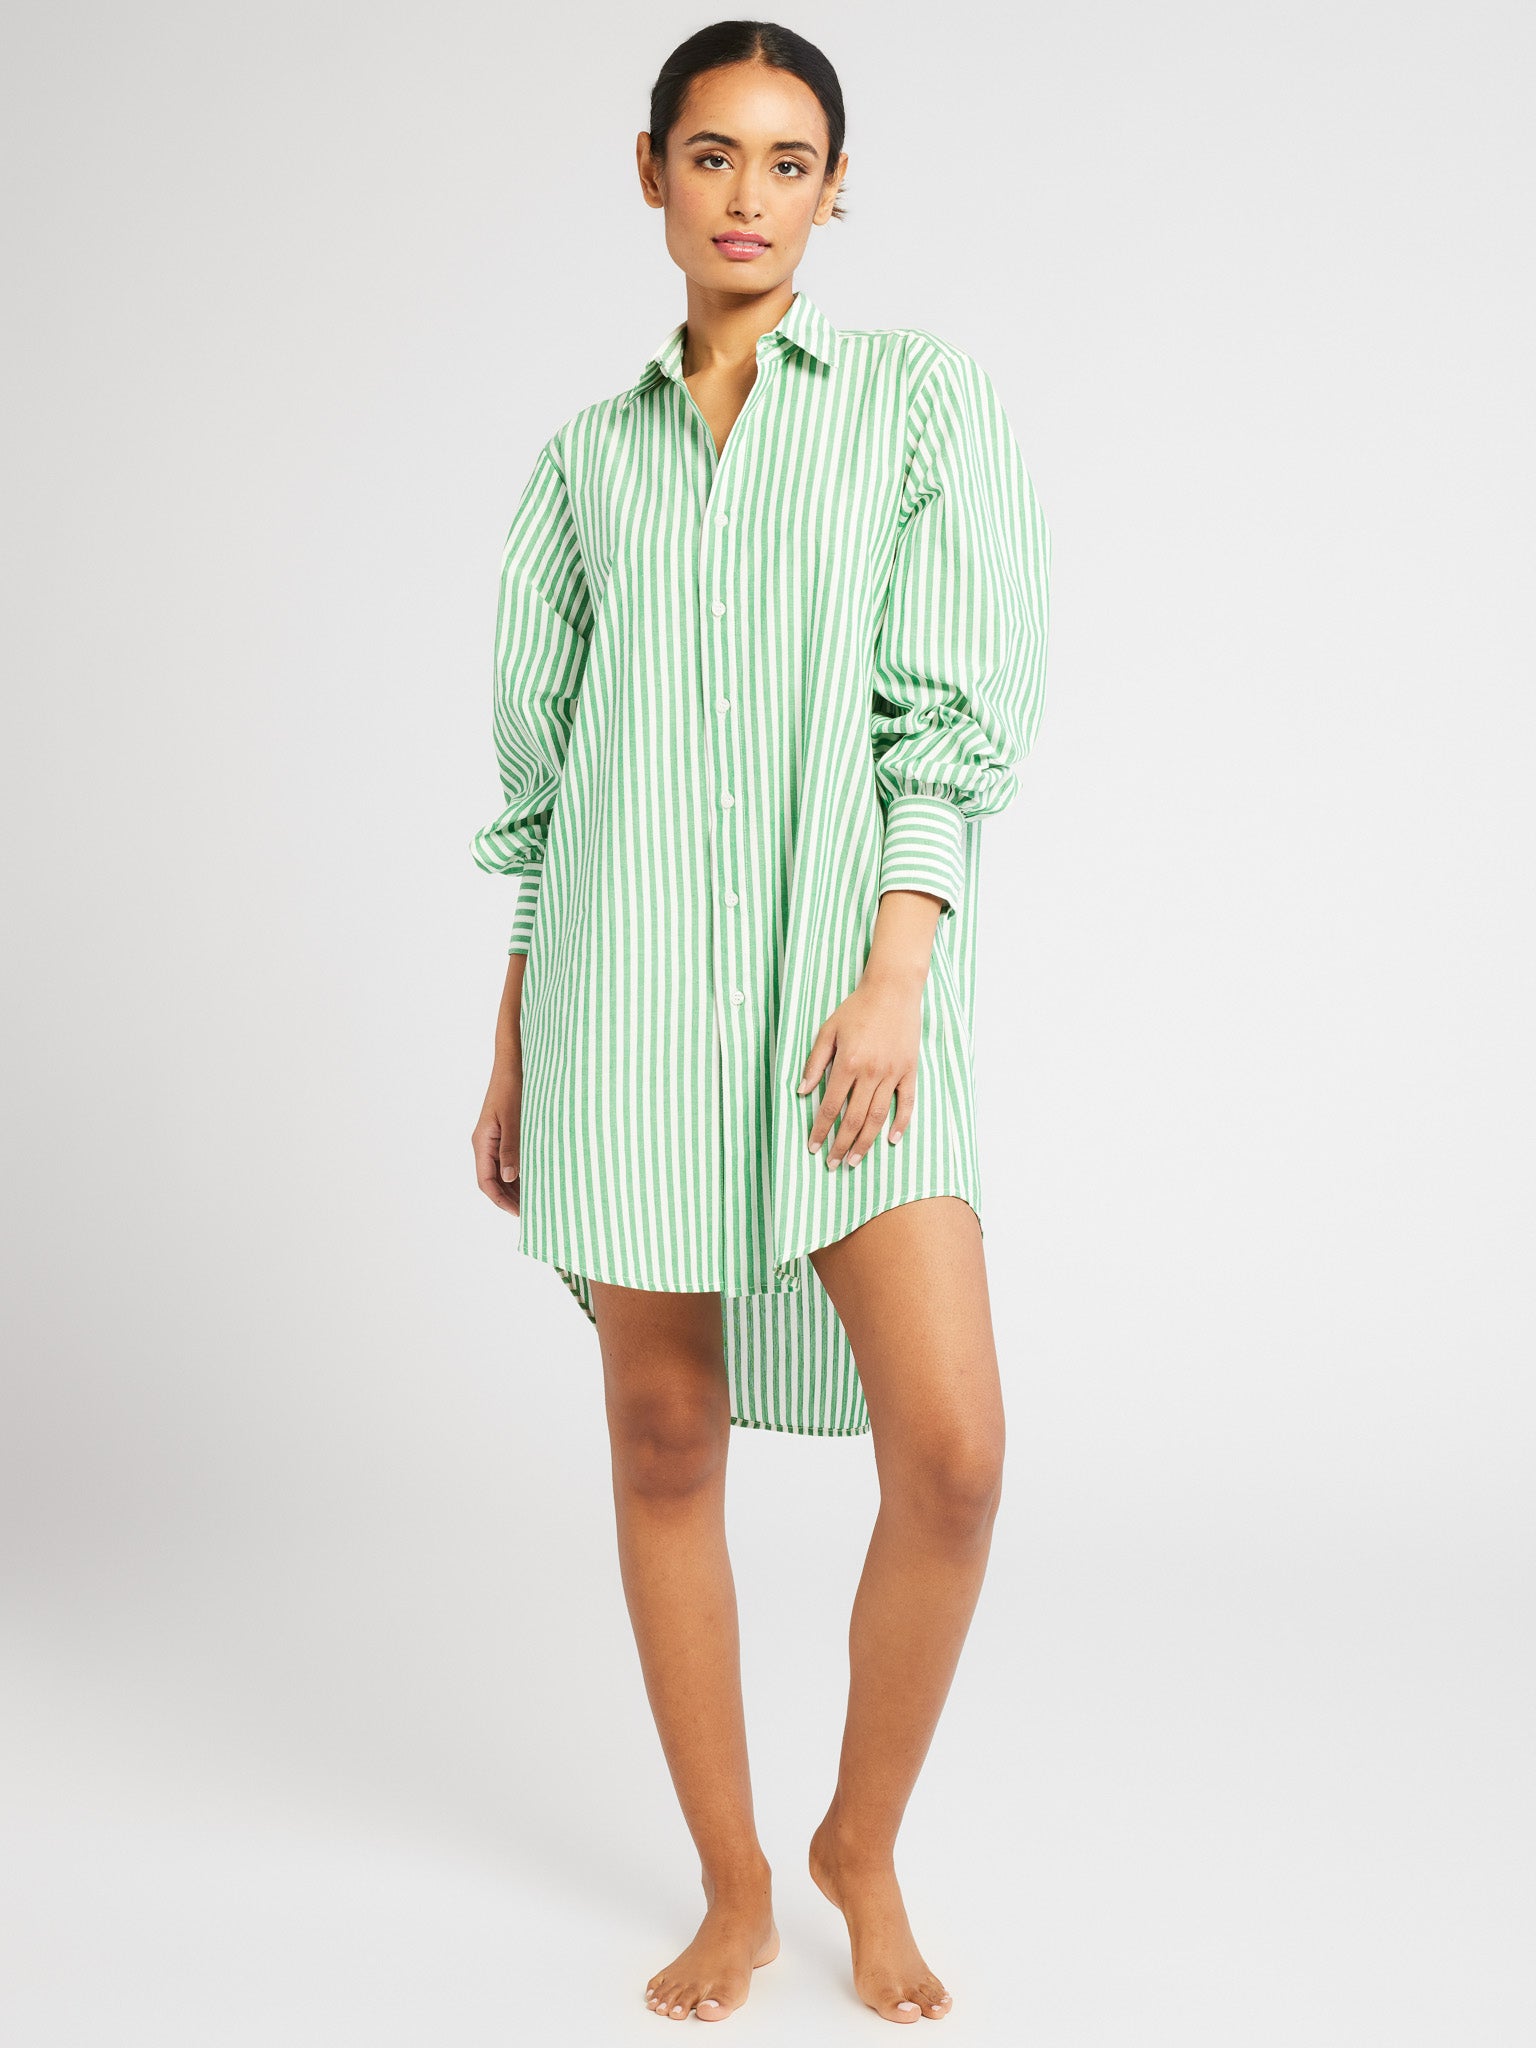 MILLE Clothing Holly Mini Dress in Kelly Stripe